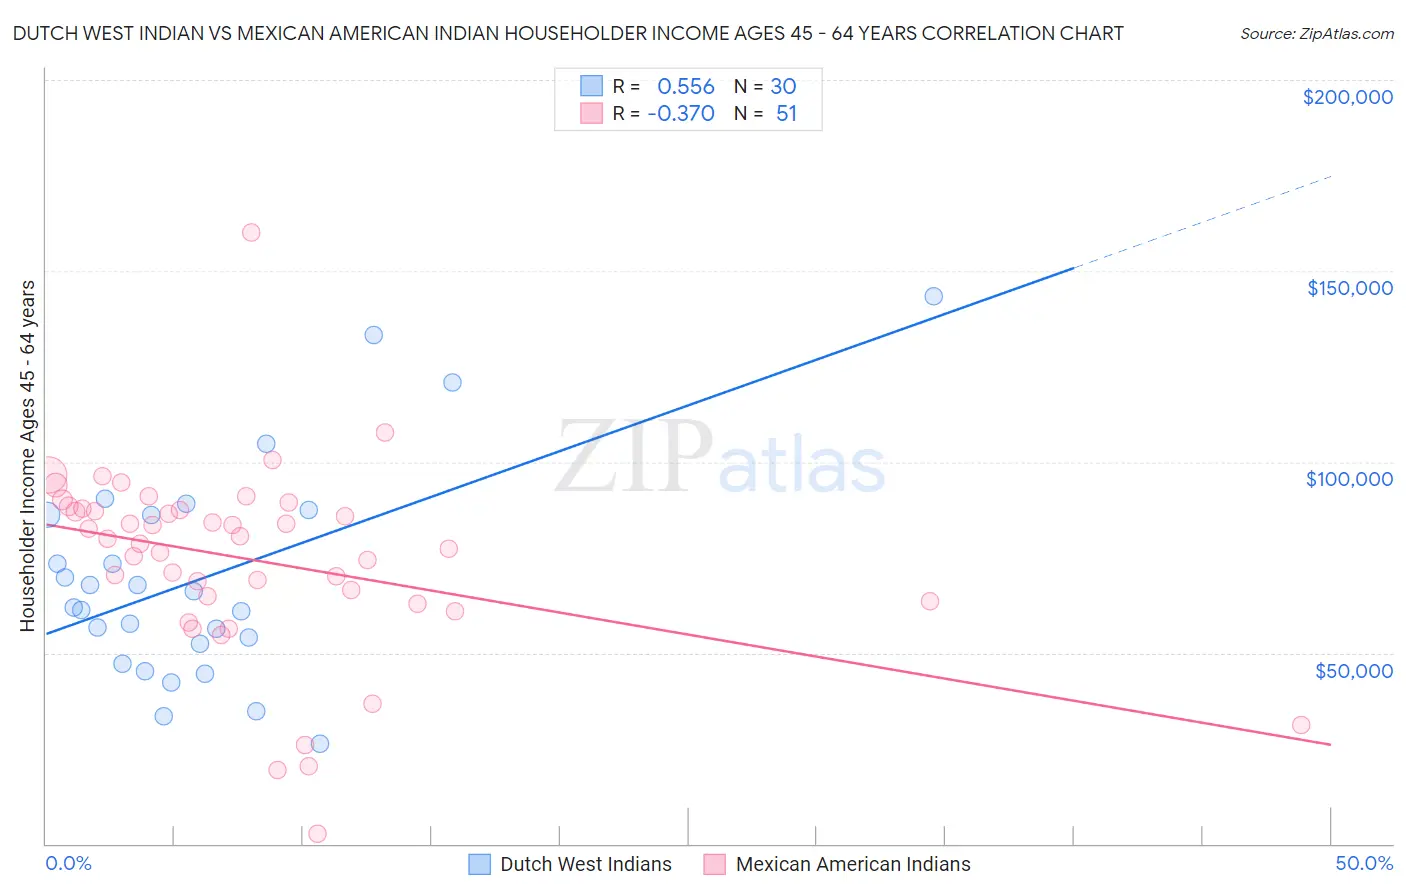 Dutch West Indian vs Mexican American Indian Householder Income Ages 45 - 64 years